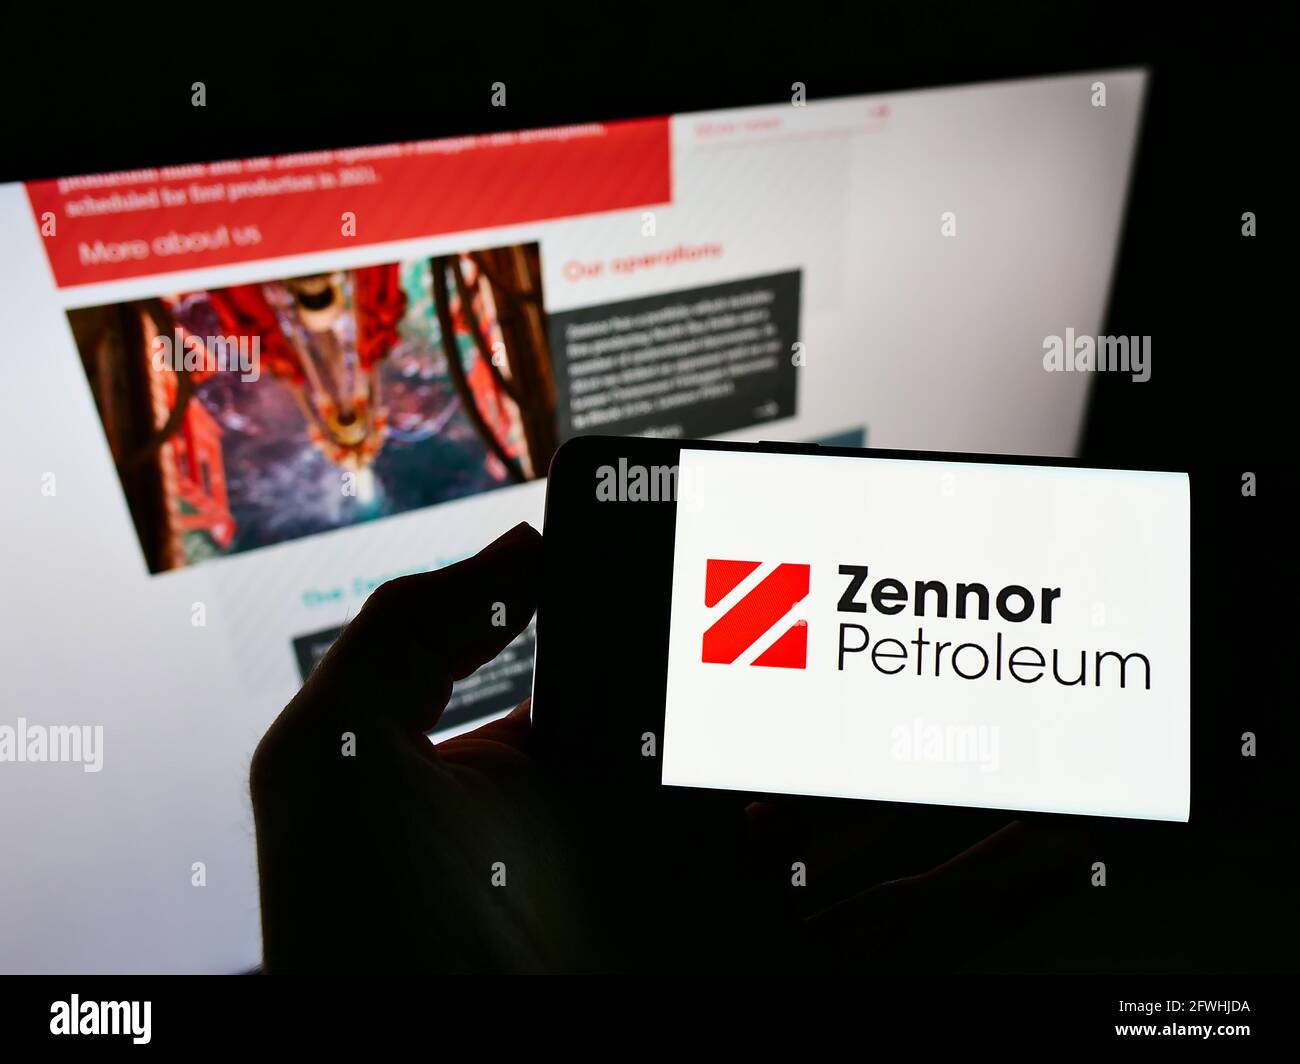 Person holding mobile phone with logo of British oil and gas company Zennor Petroleum Ltd. on screen in front of web page. Focus on phone display. Stock Photo